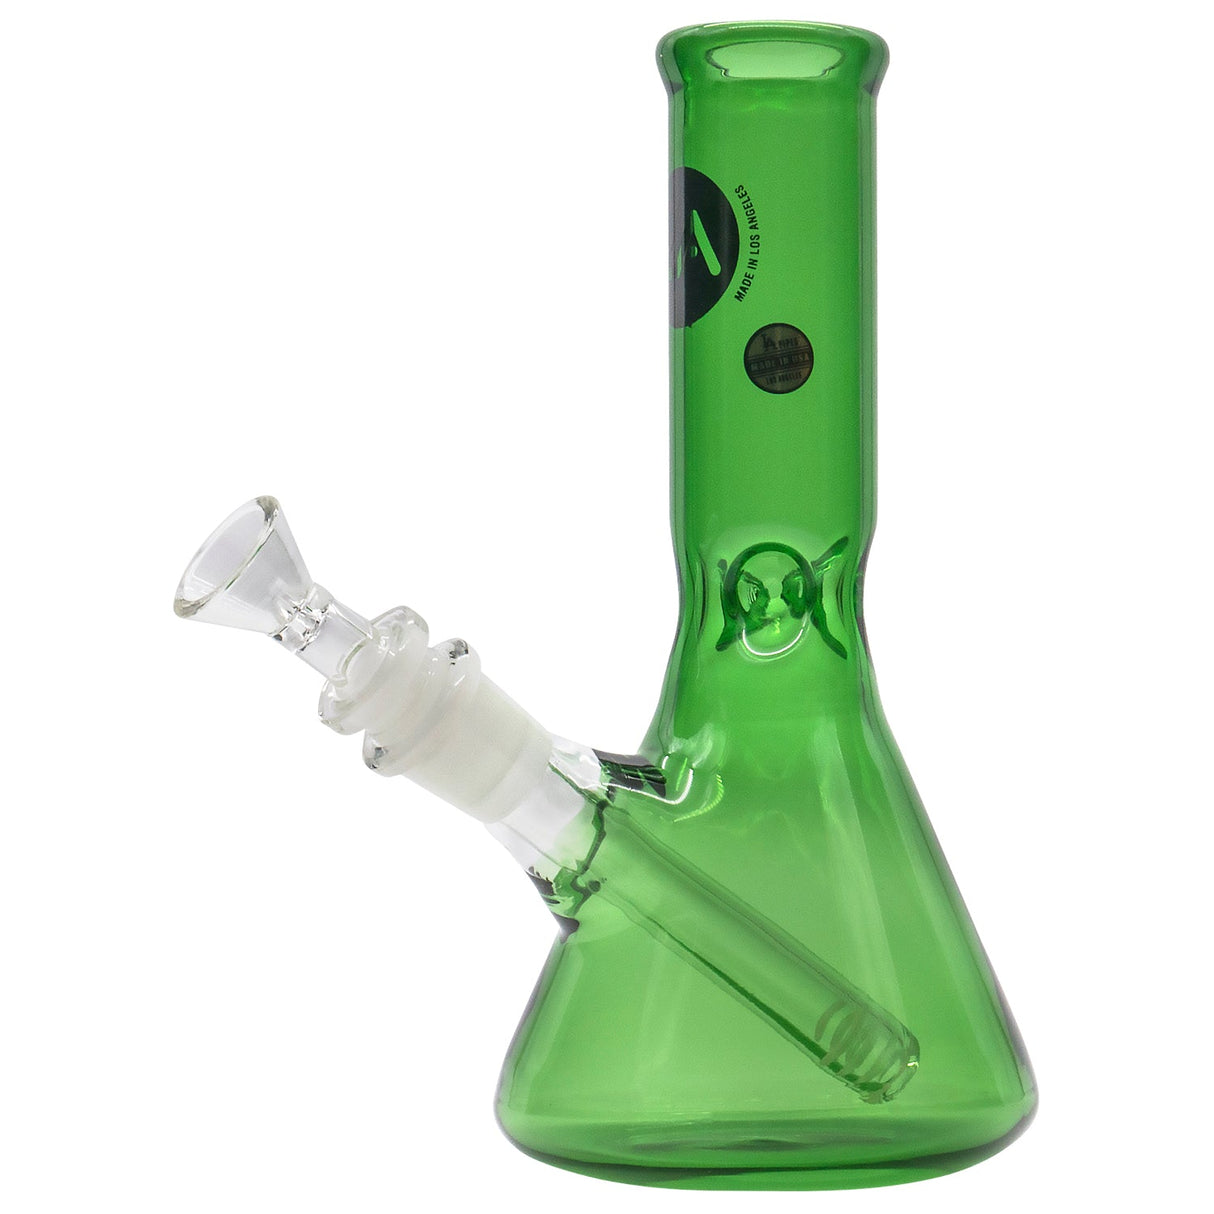 LA Pipes 8" Beaker Bong in Vibrant Green with Glass on Glass Joint - Front View